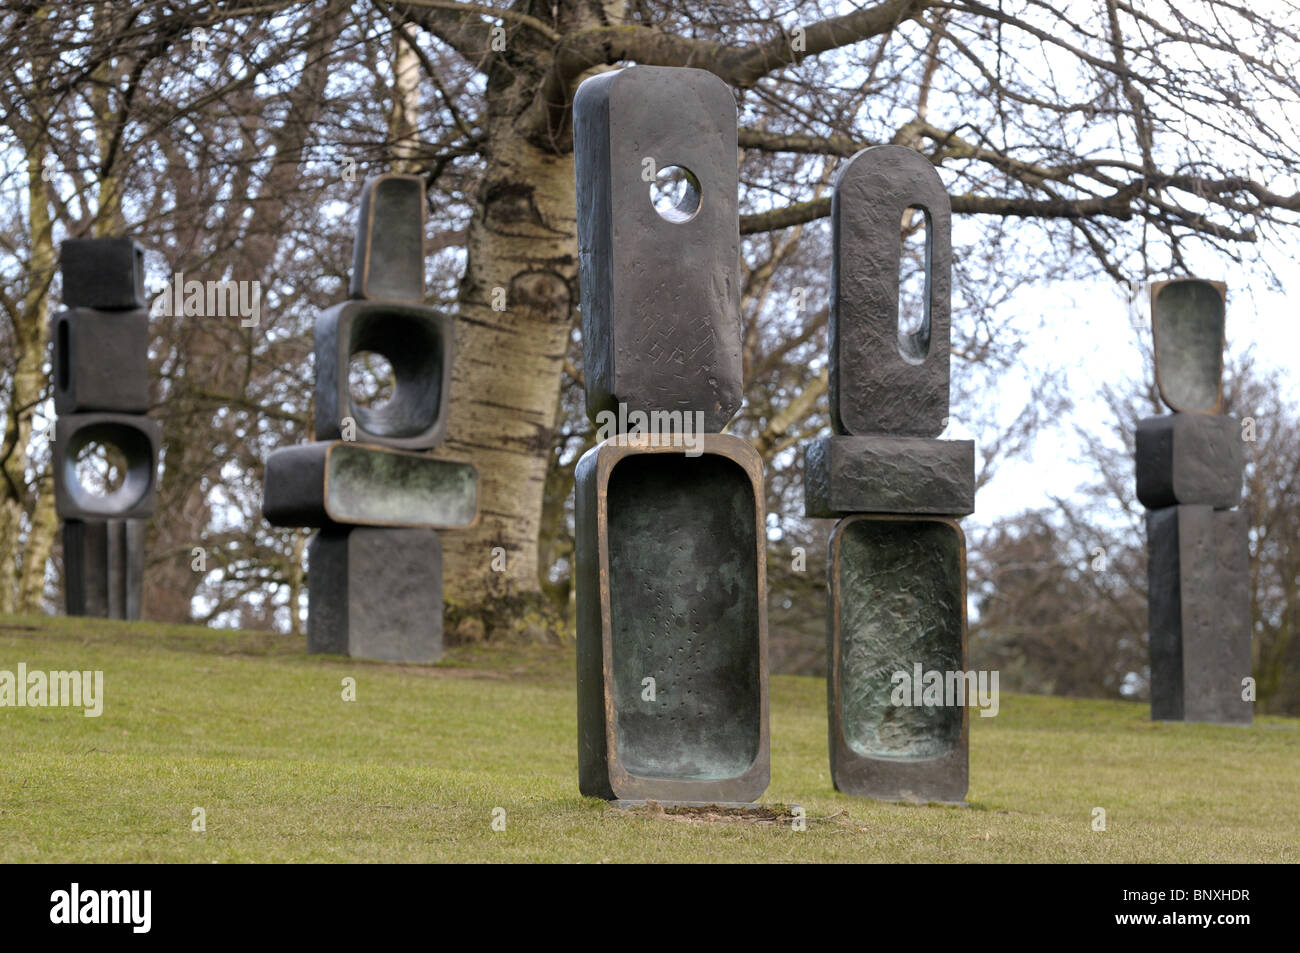 Family Of Man By Barbara Hepworth In The Yorkshire Sculpture Park At West Bretton, Wakefield, Yorkshire Stock Photo